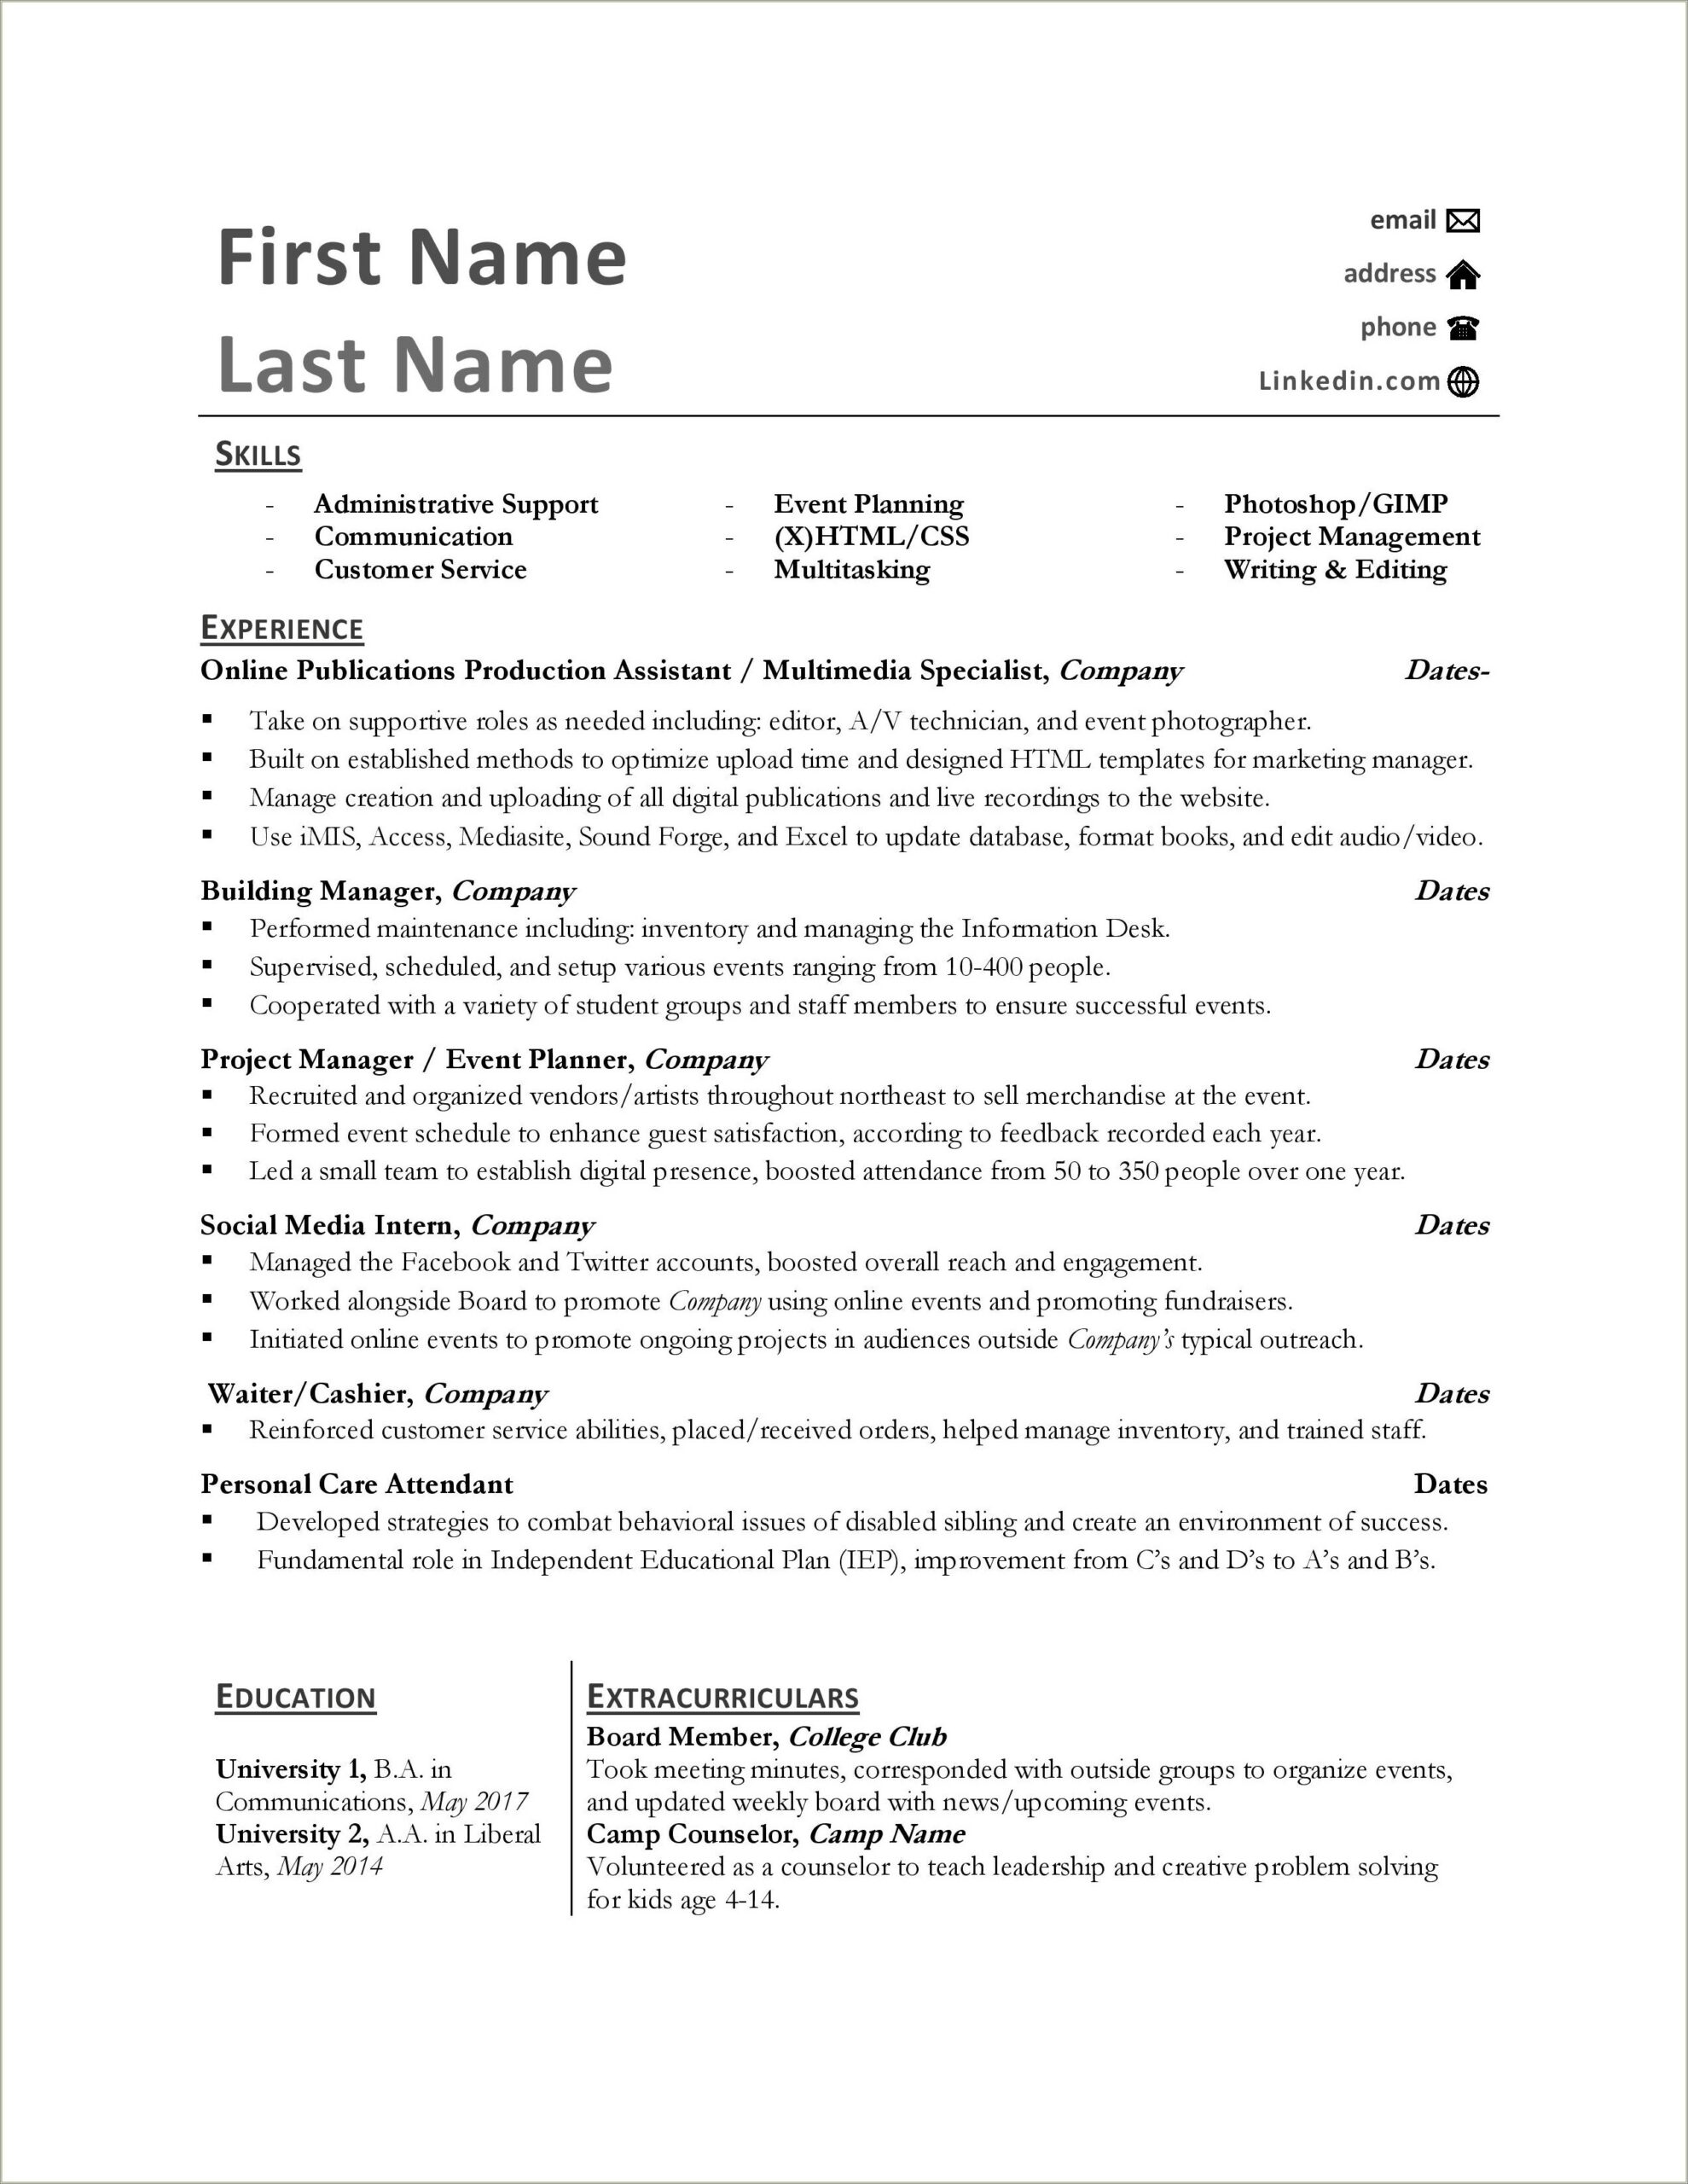 Resume Two Jobs That Ended At Same Time